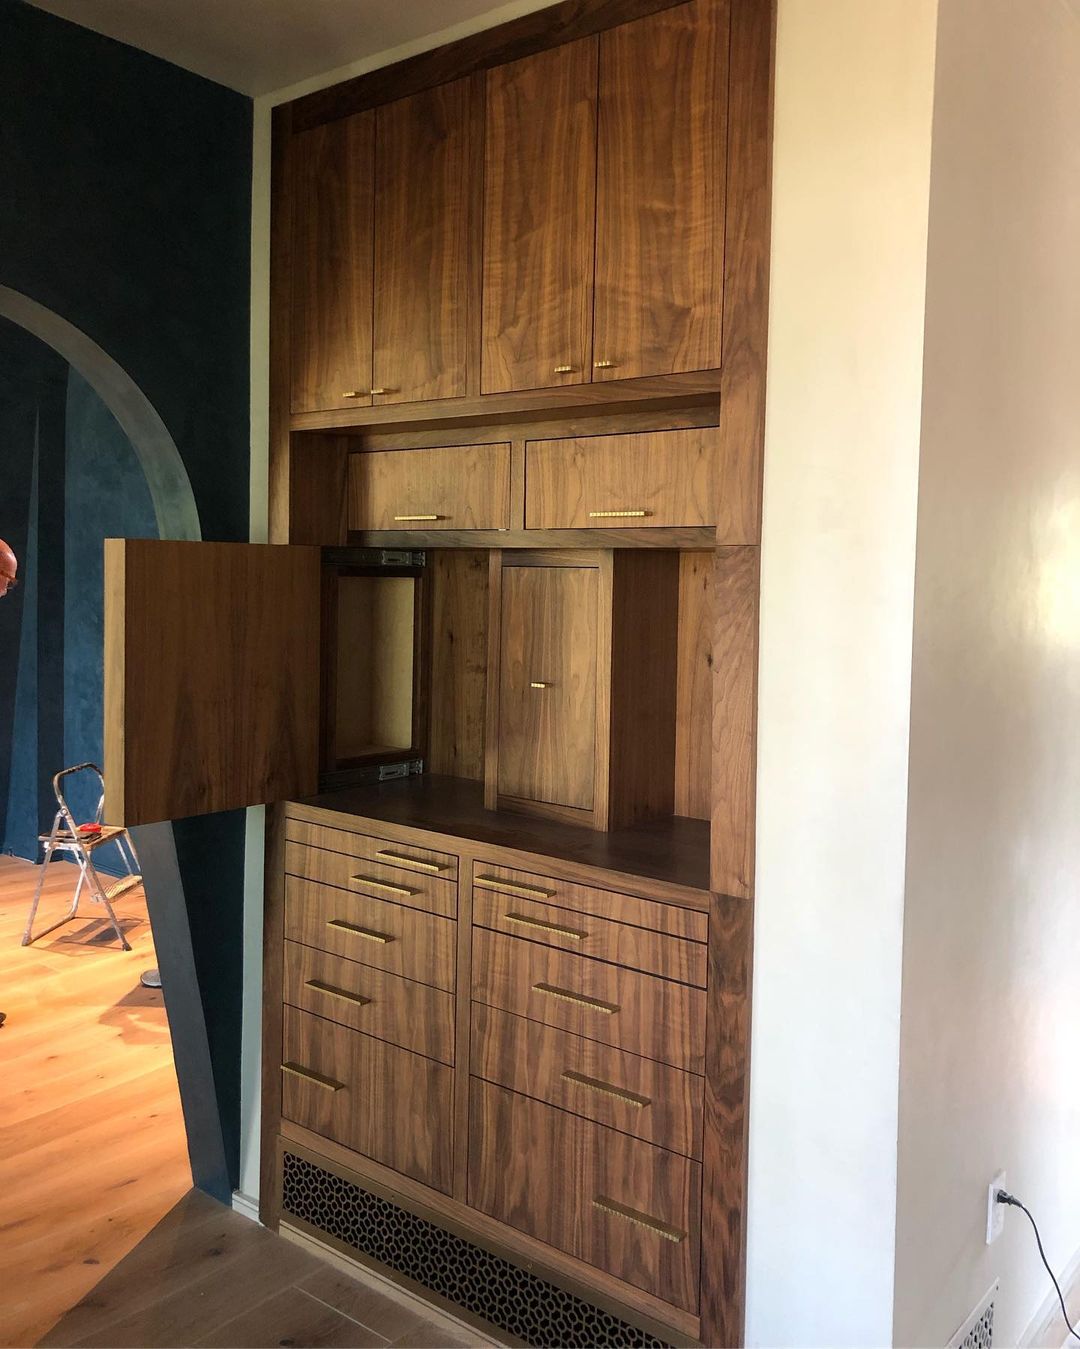 Built in jewelry cabinet with a few hiding places